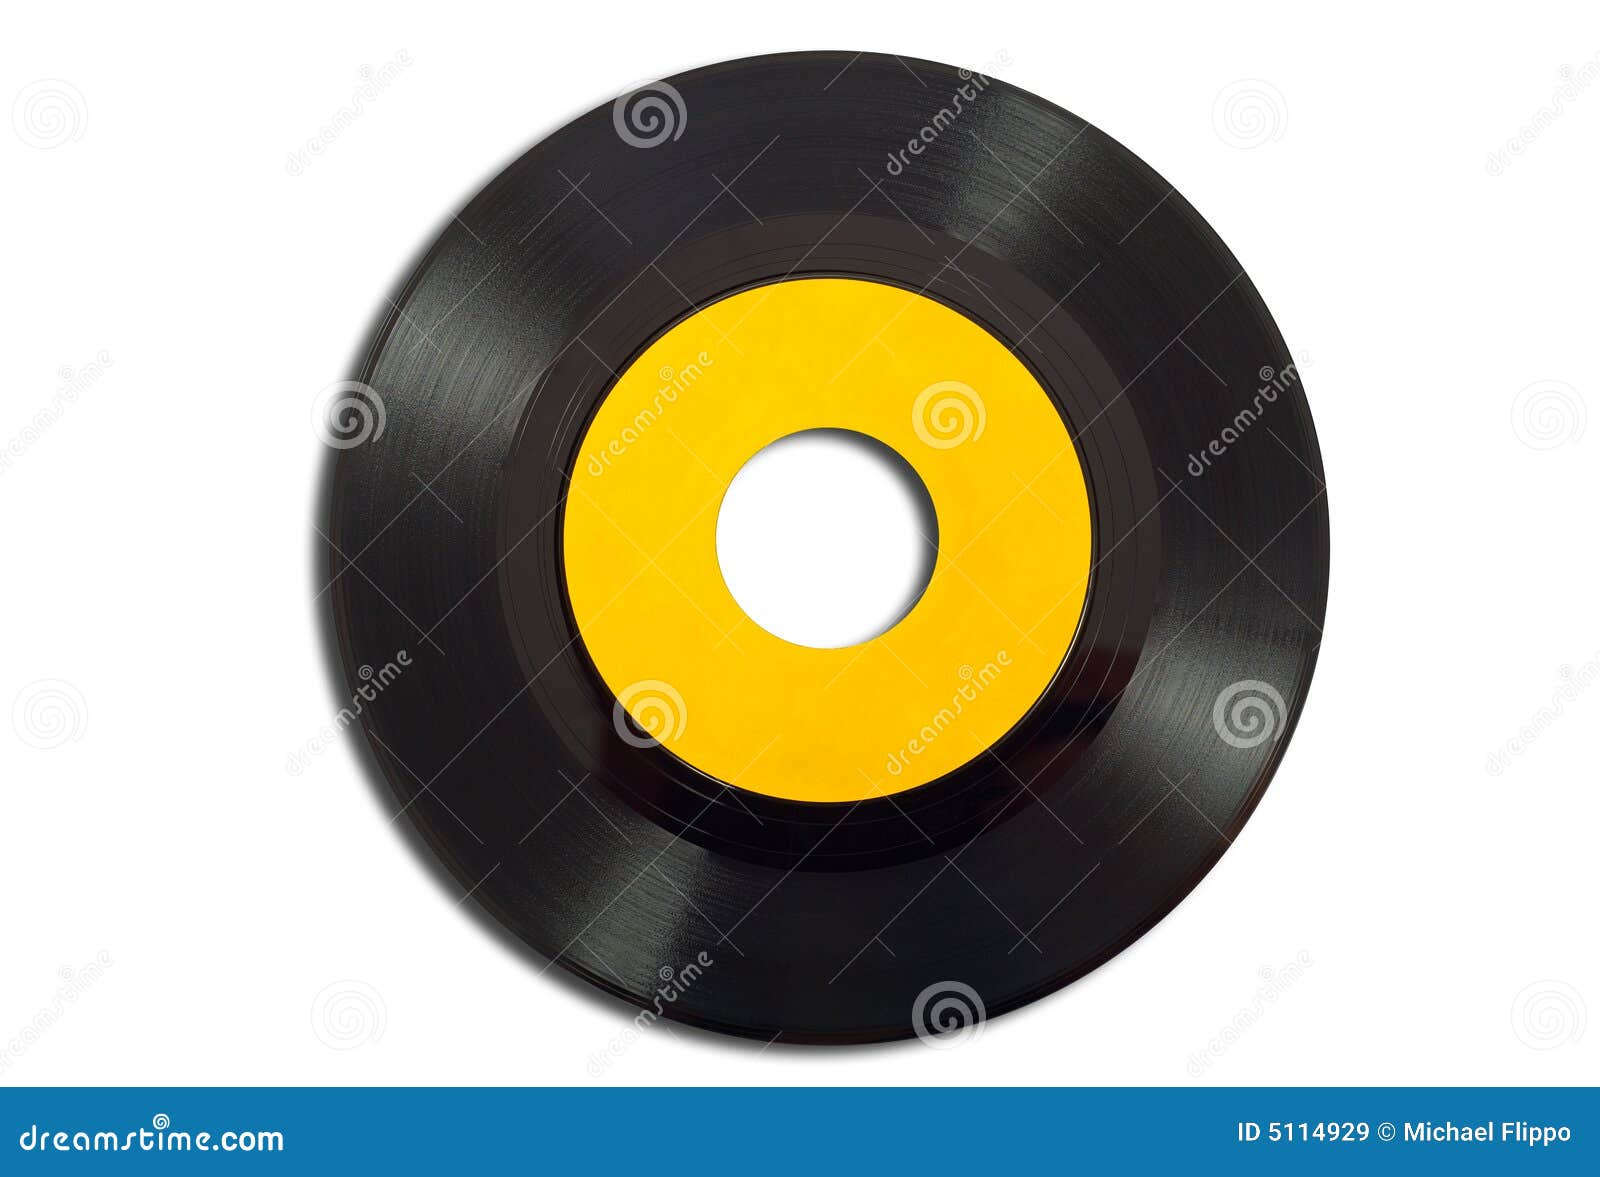 Vintage Record Albums Royalty Free Stock Images - Image: 5114929